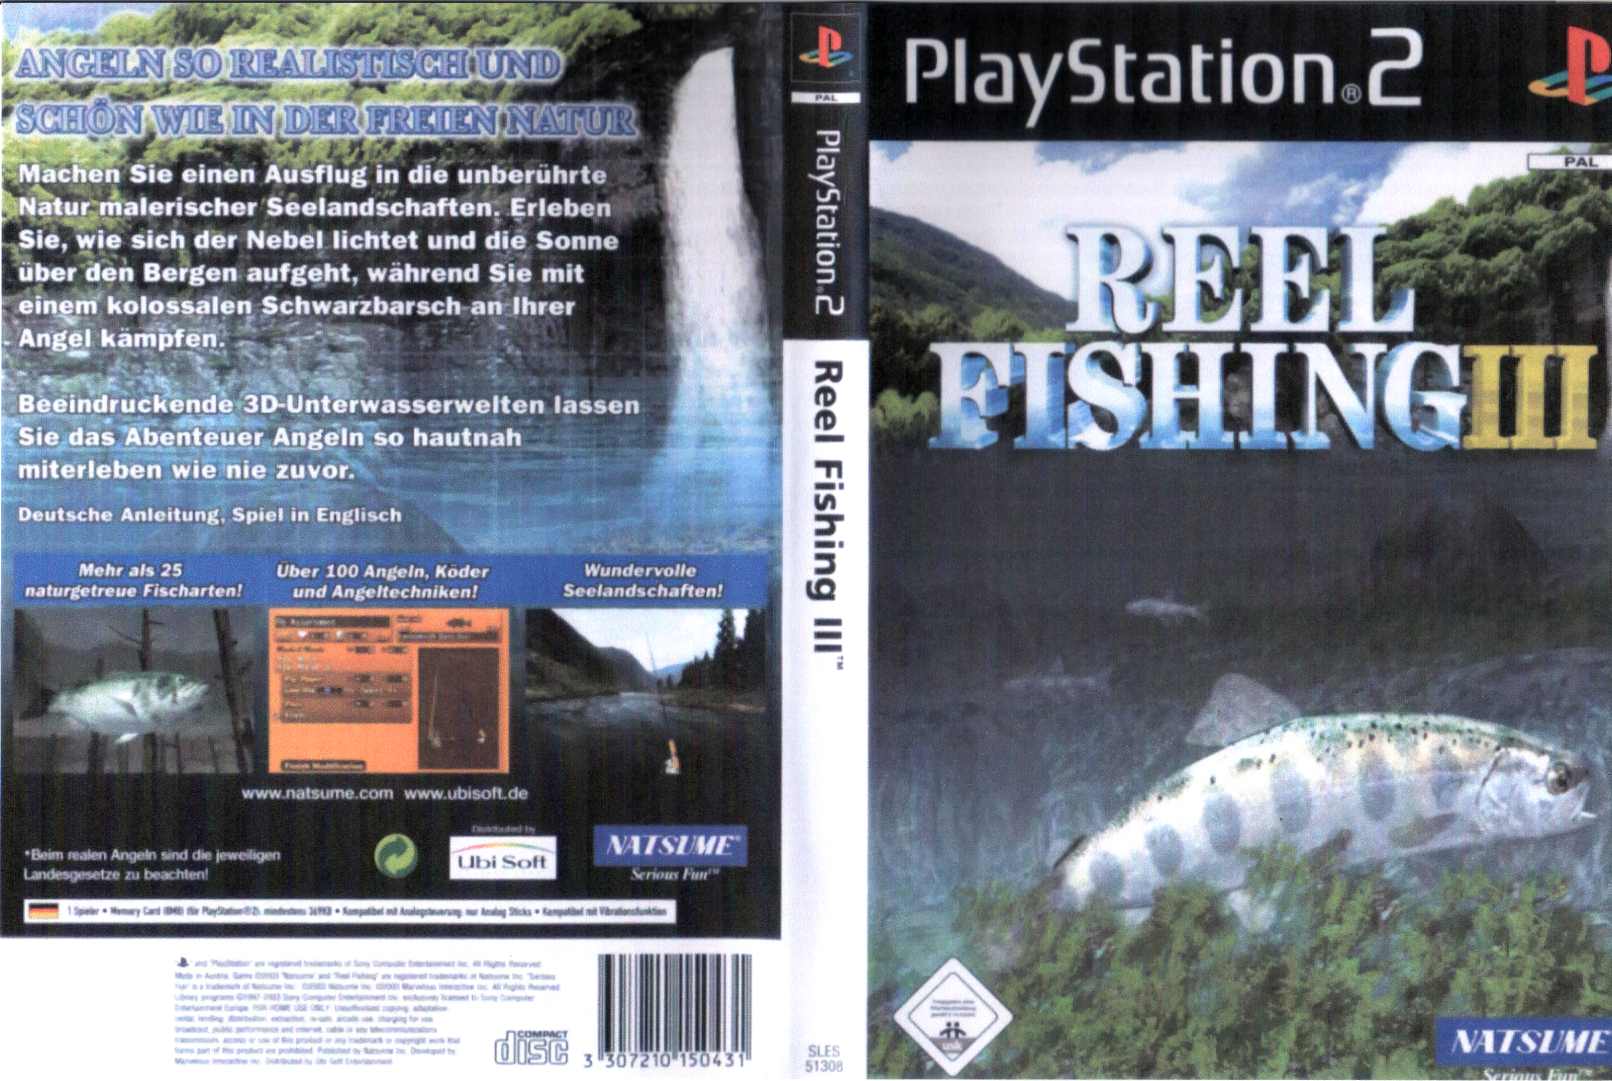 reel fishing 3 Full, Playstation 2 Covers, Cover Century